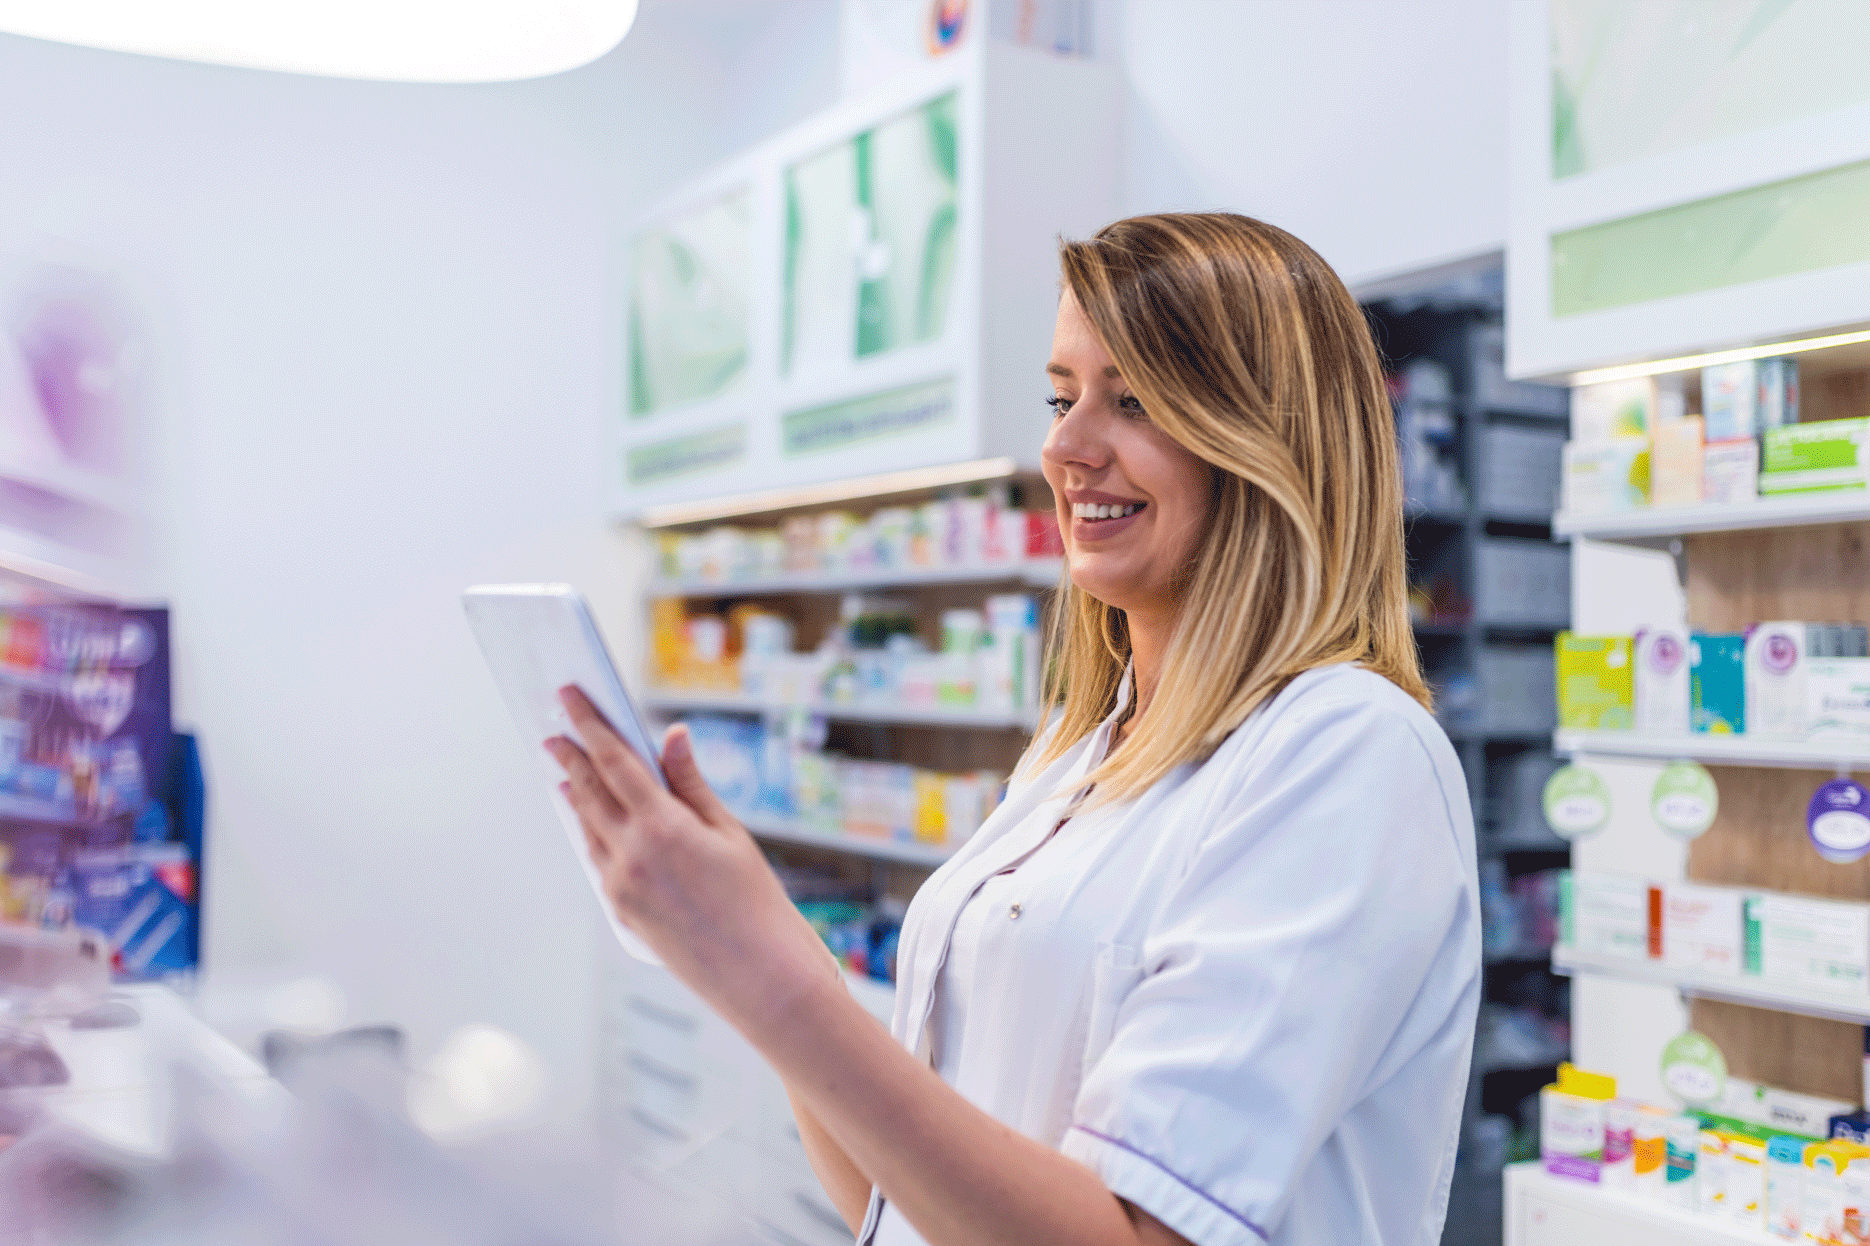 Pharmacist looking at tablet and smiling